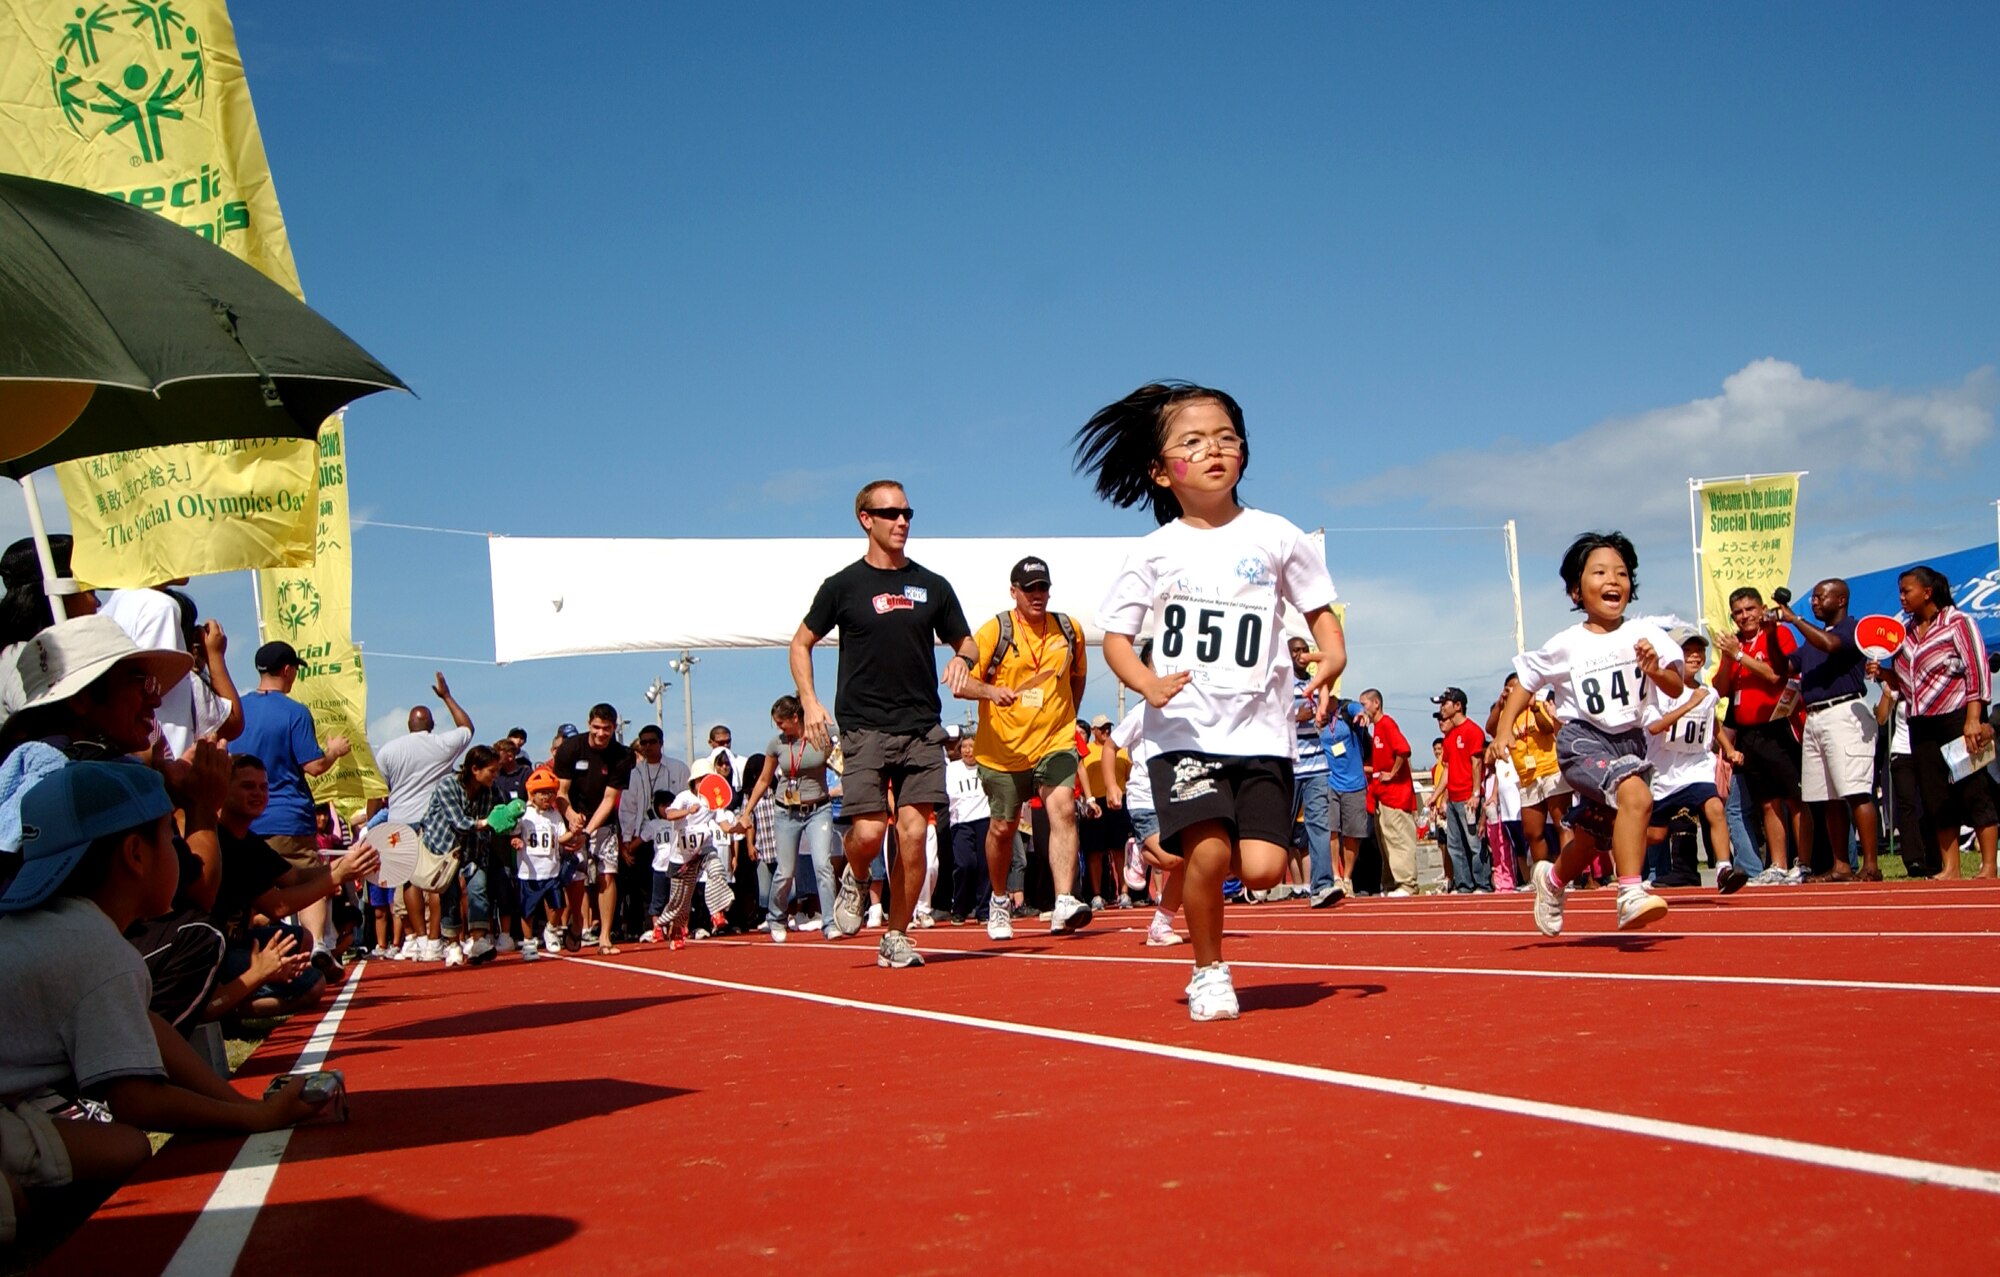 A young Okinawan girl participates in a run during the beginning of Kadena Special Olympics Nov. 8, 2008 at Kadena Air Base, Japan.  Kadena hosted the 9th Annual Special Olympic Games and Art Festival for special needs Okinawan and American adult and child athletes.    (U.S. Air Force photo/Tech. Sgt. Rey Ramon)                        